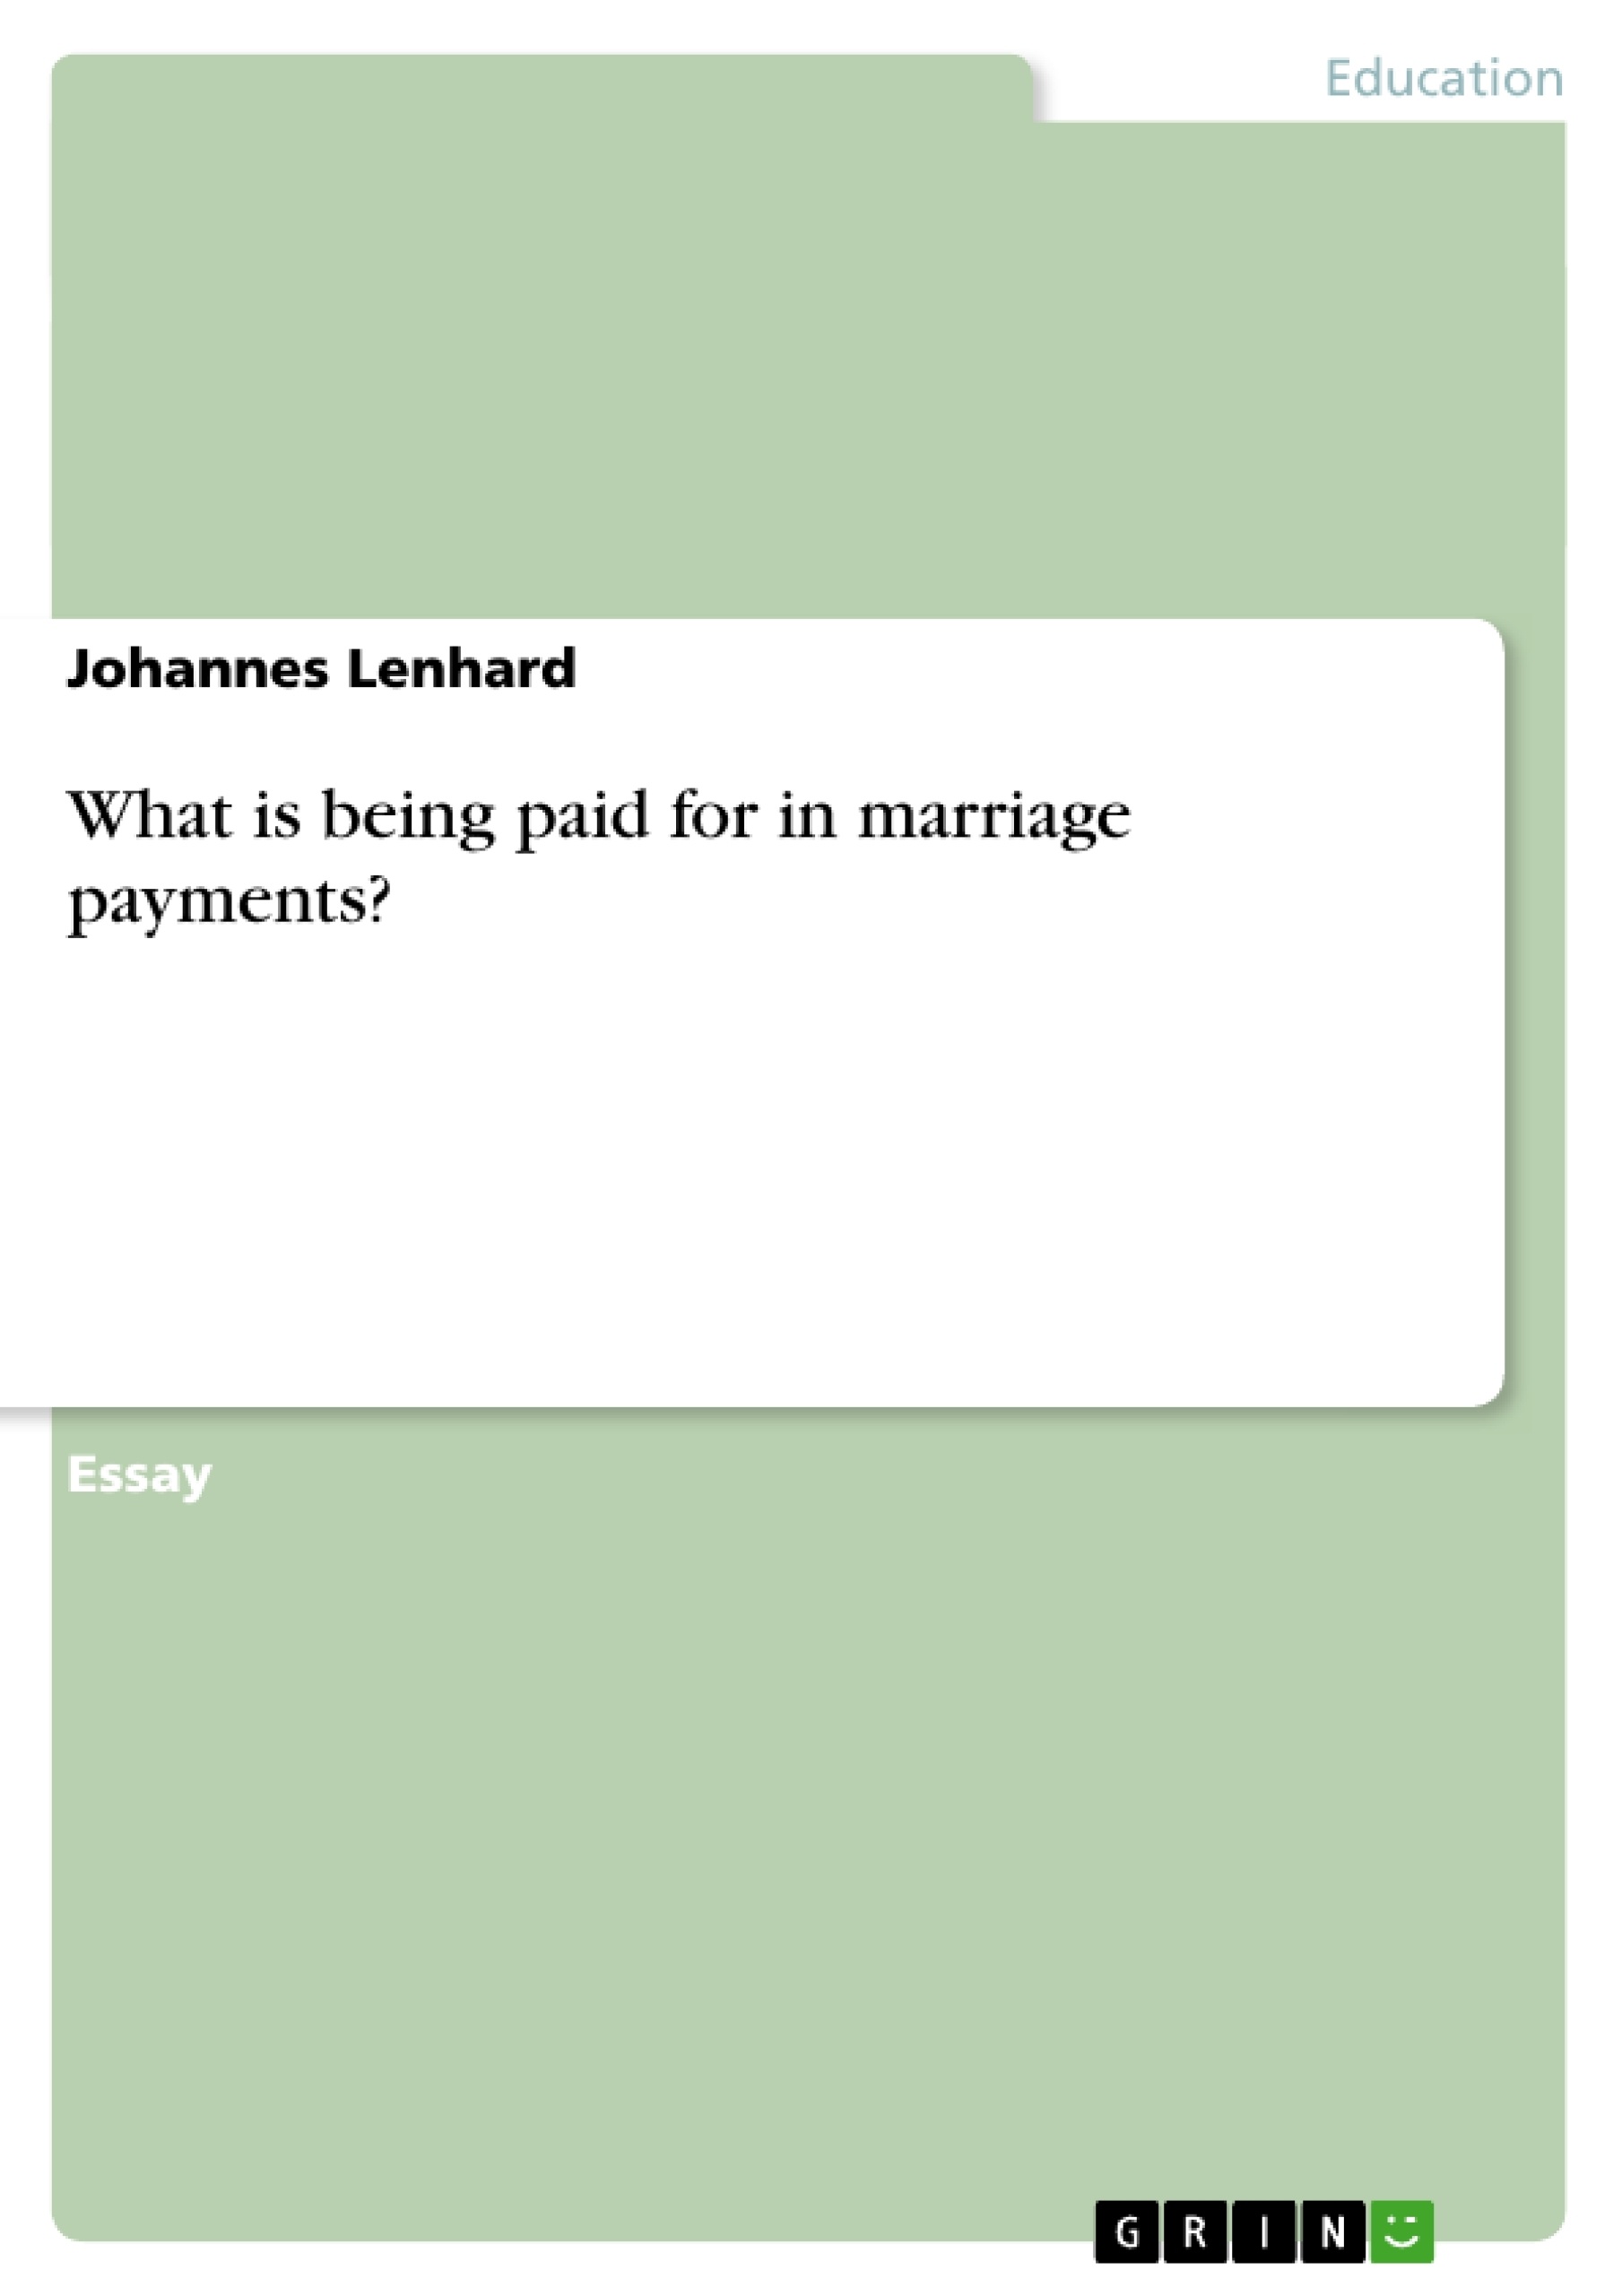 Title: What is being paid for in marriage payments?